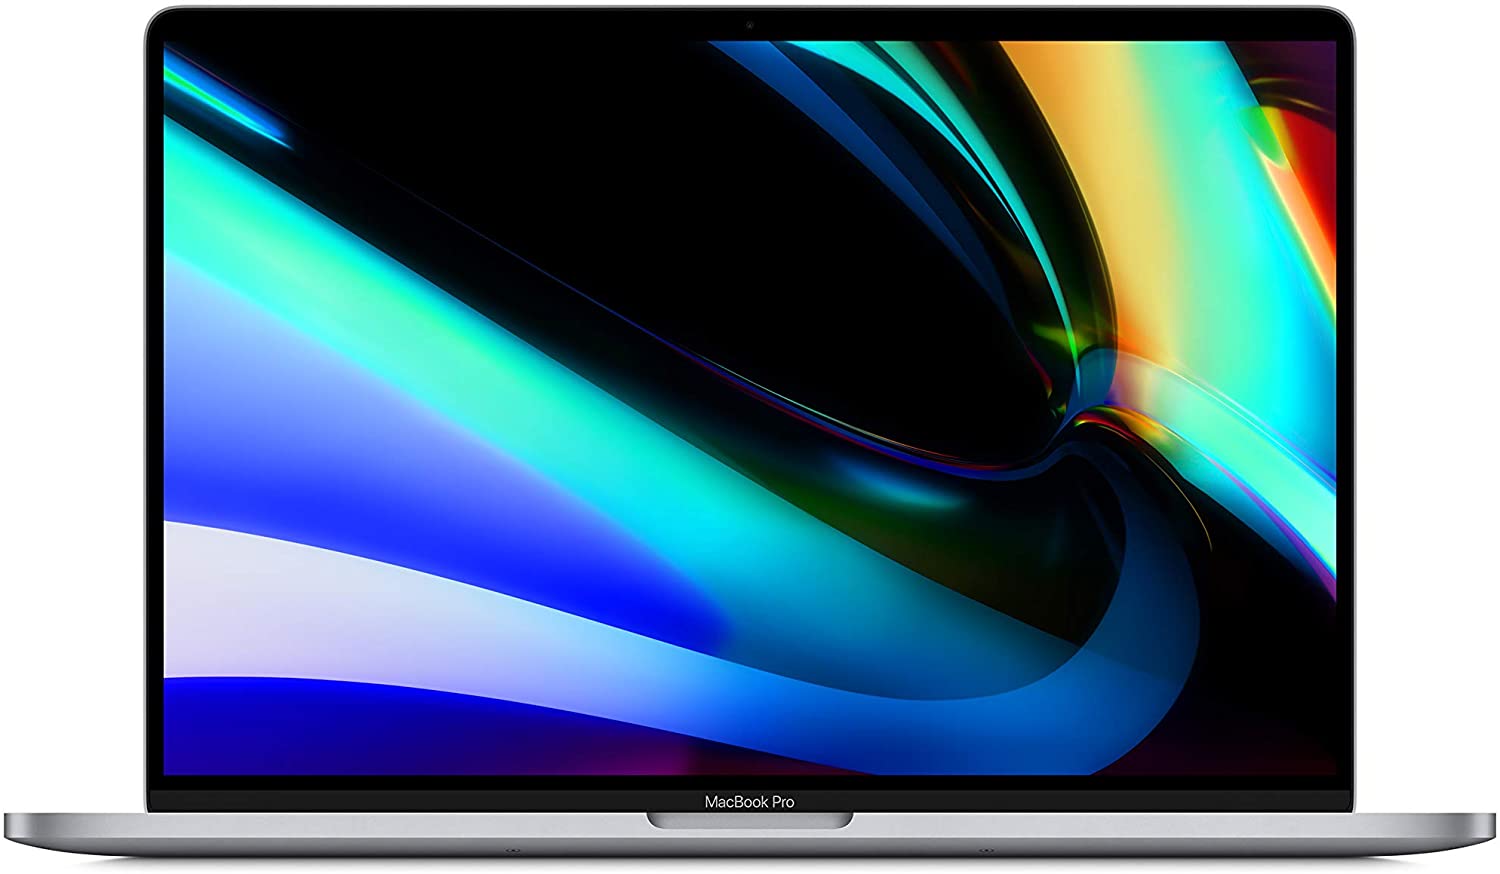 Apple MacBook Pro 16-inch with Four Thunderbolt 3 (USB-C) Ports